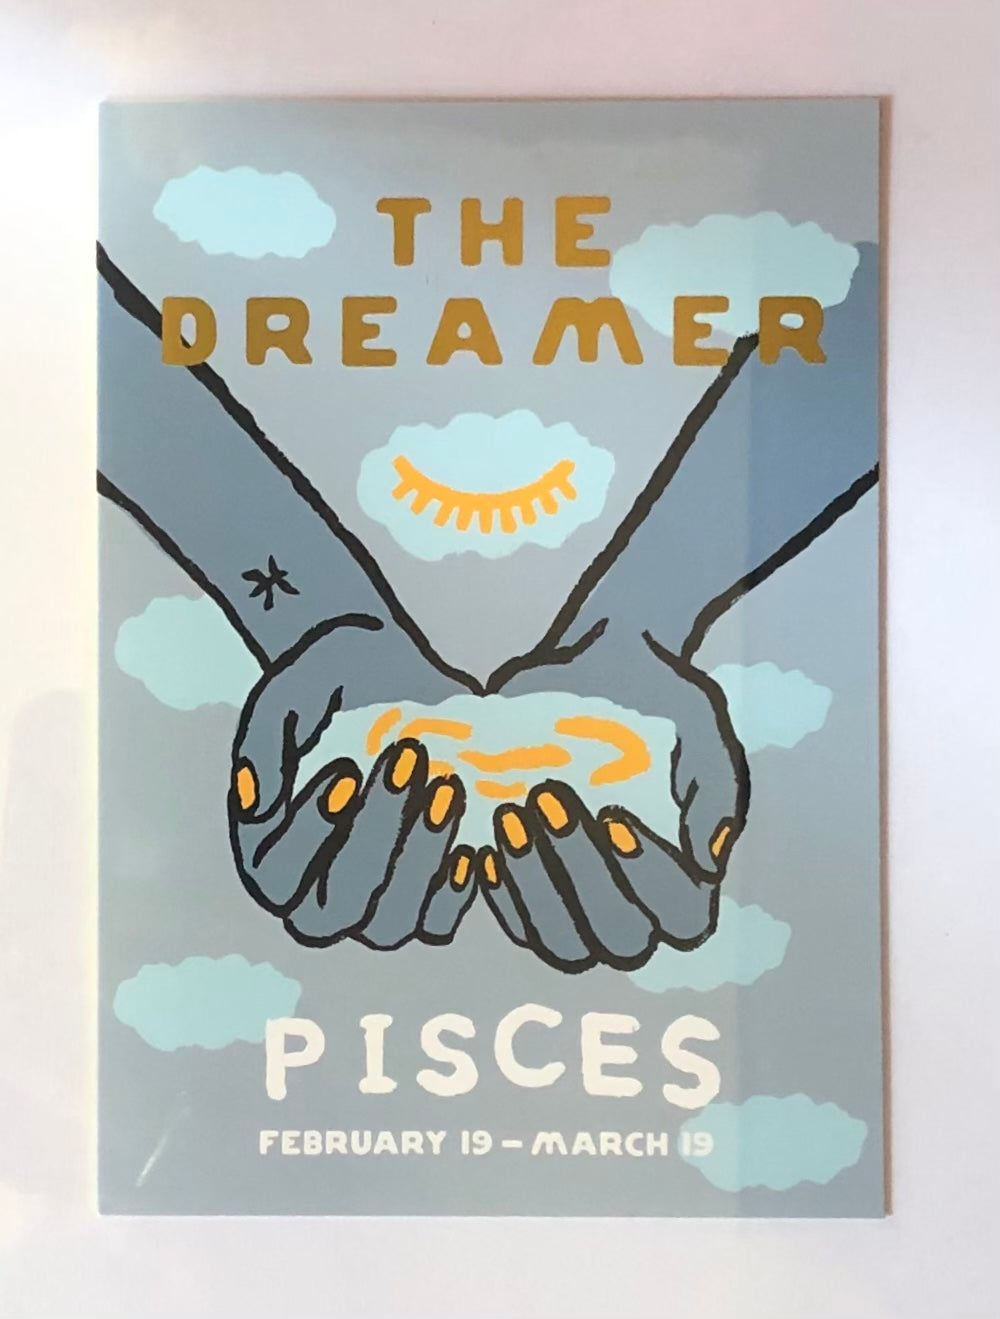 The Dreamer Pisces card